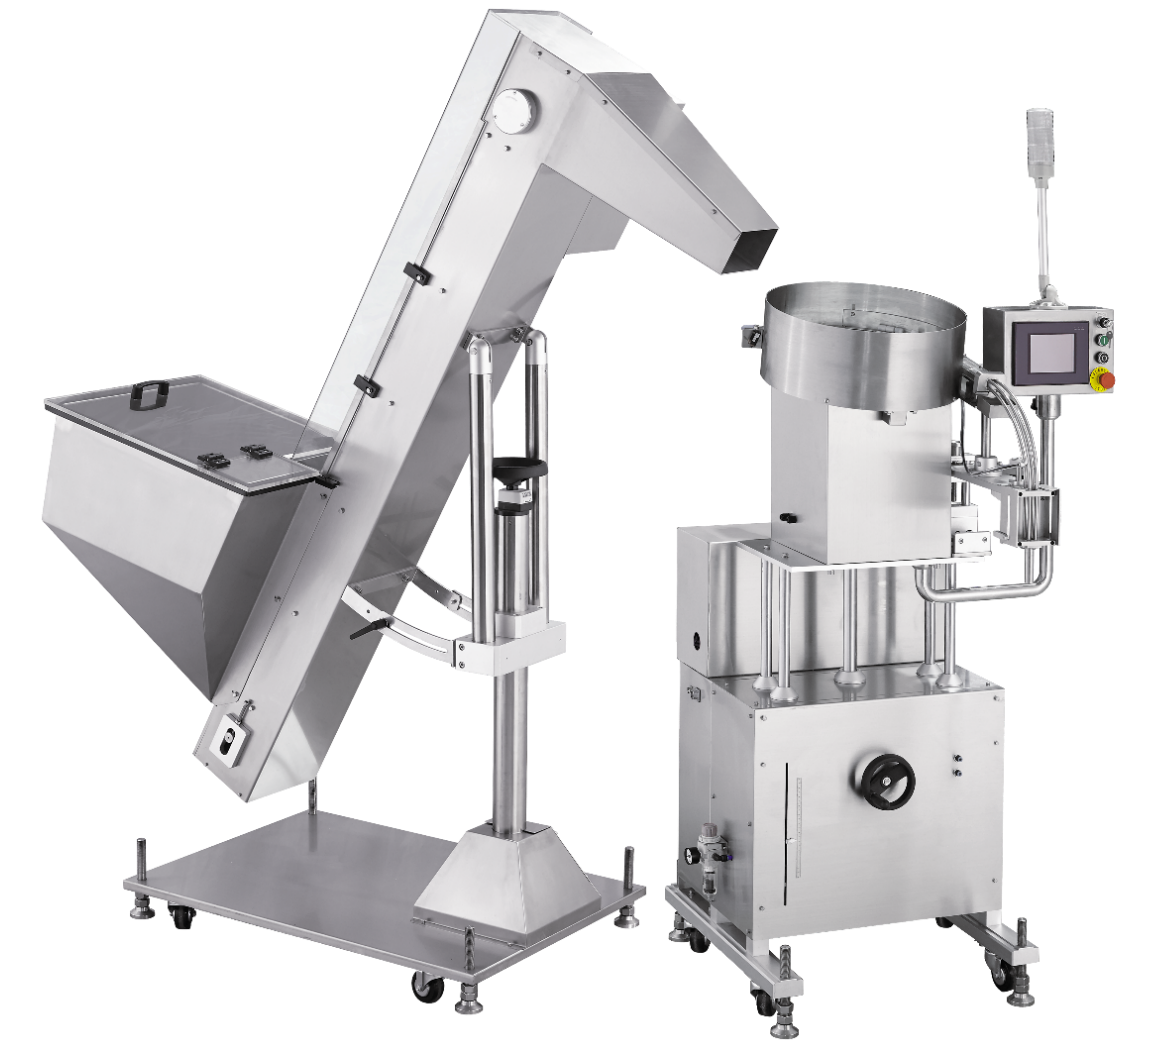 What is the desiccant inserter？